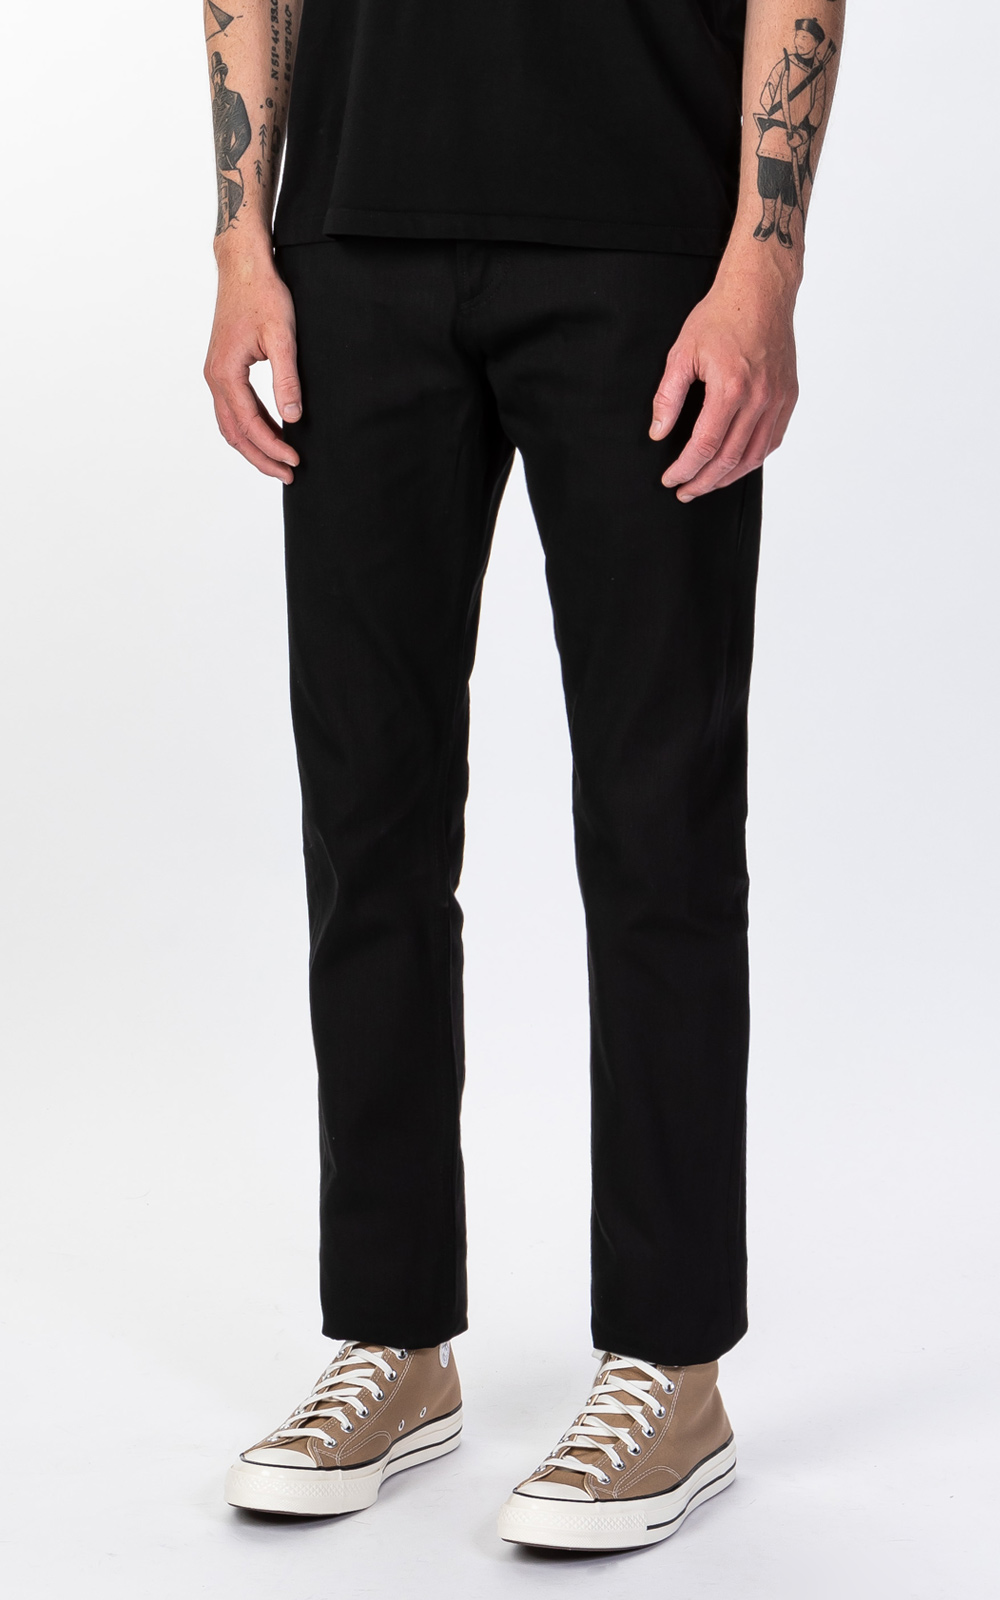 Rogue Territory Officer Trouser Stealth Black 11oz | Cultizm